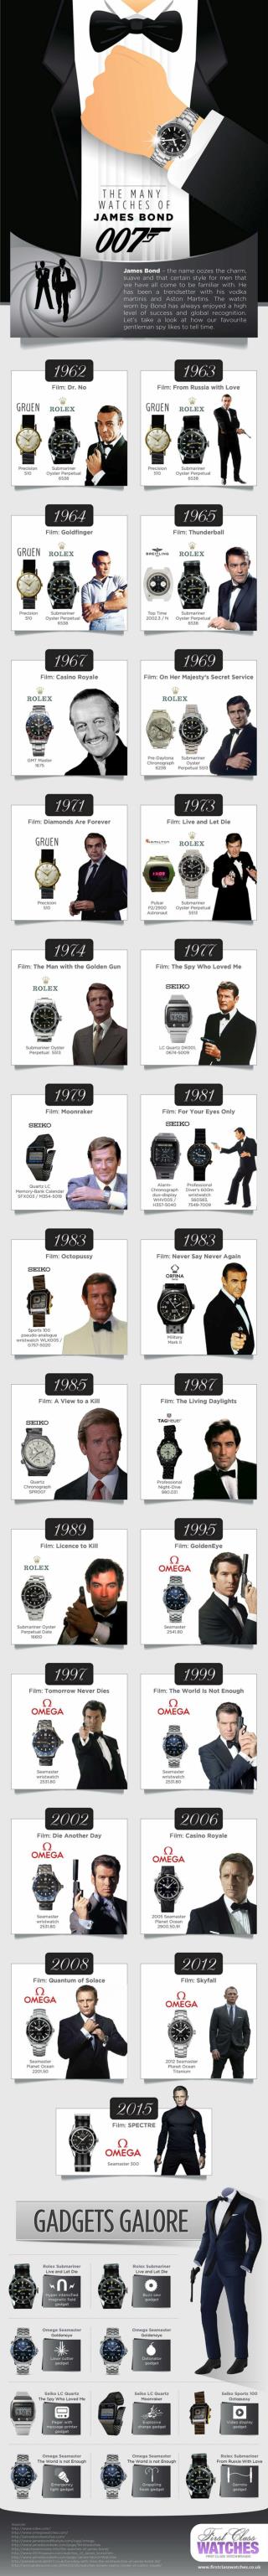 The Many Watches of James Bond